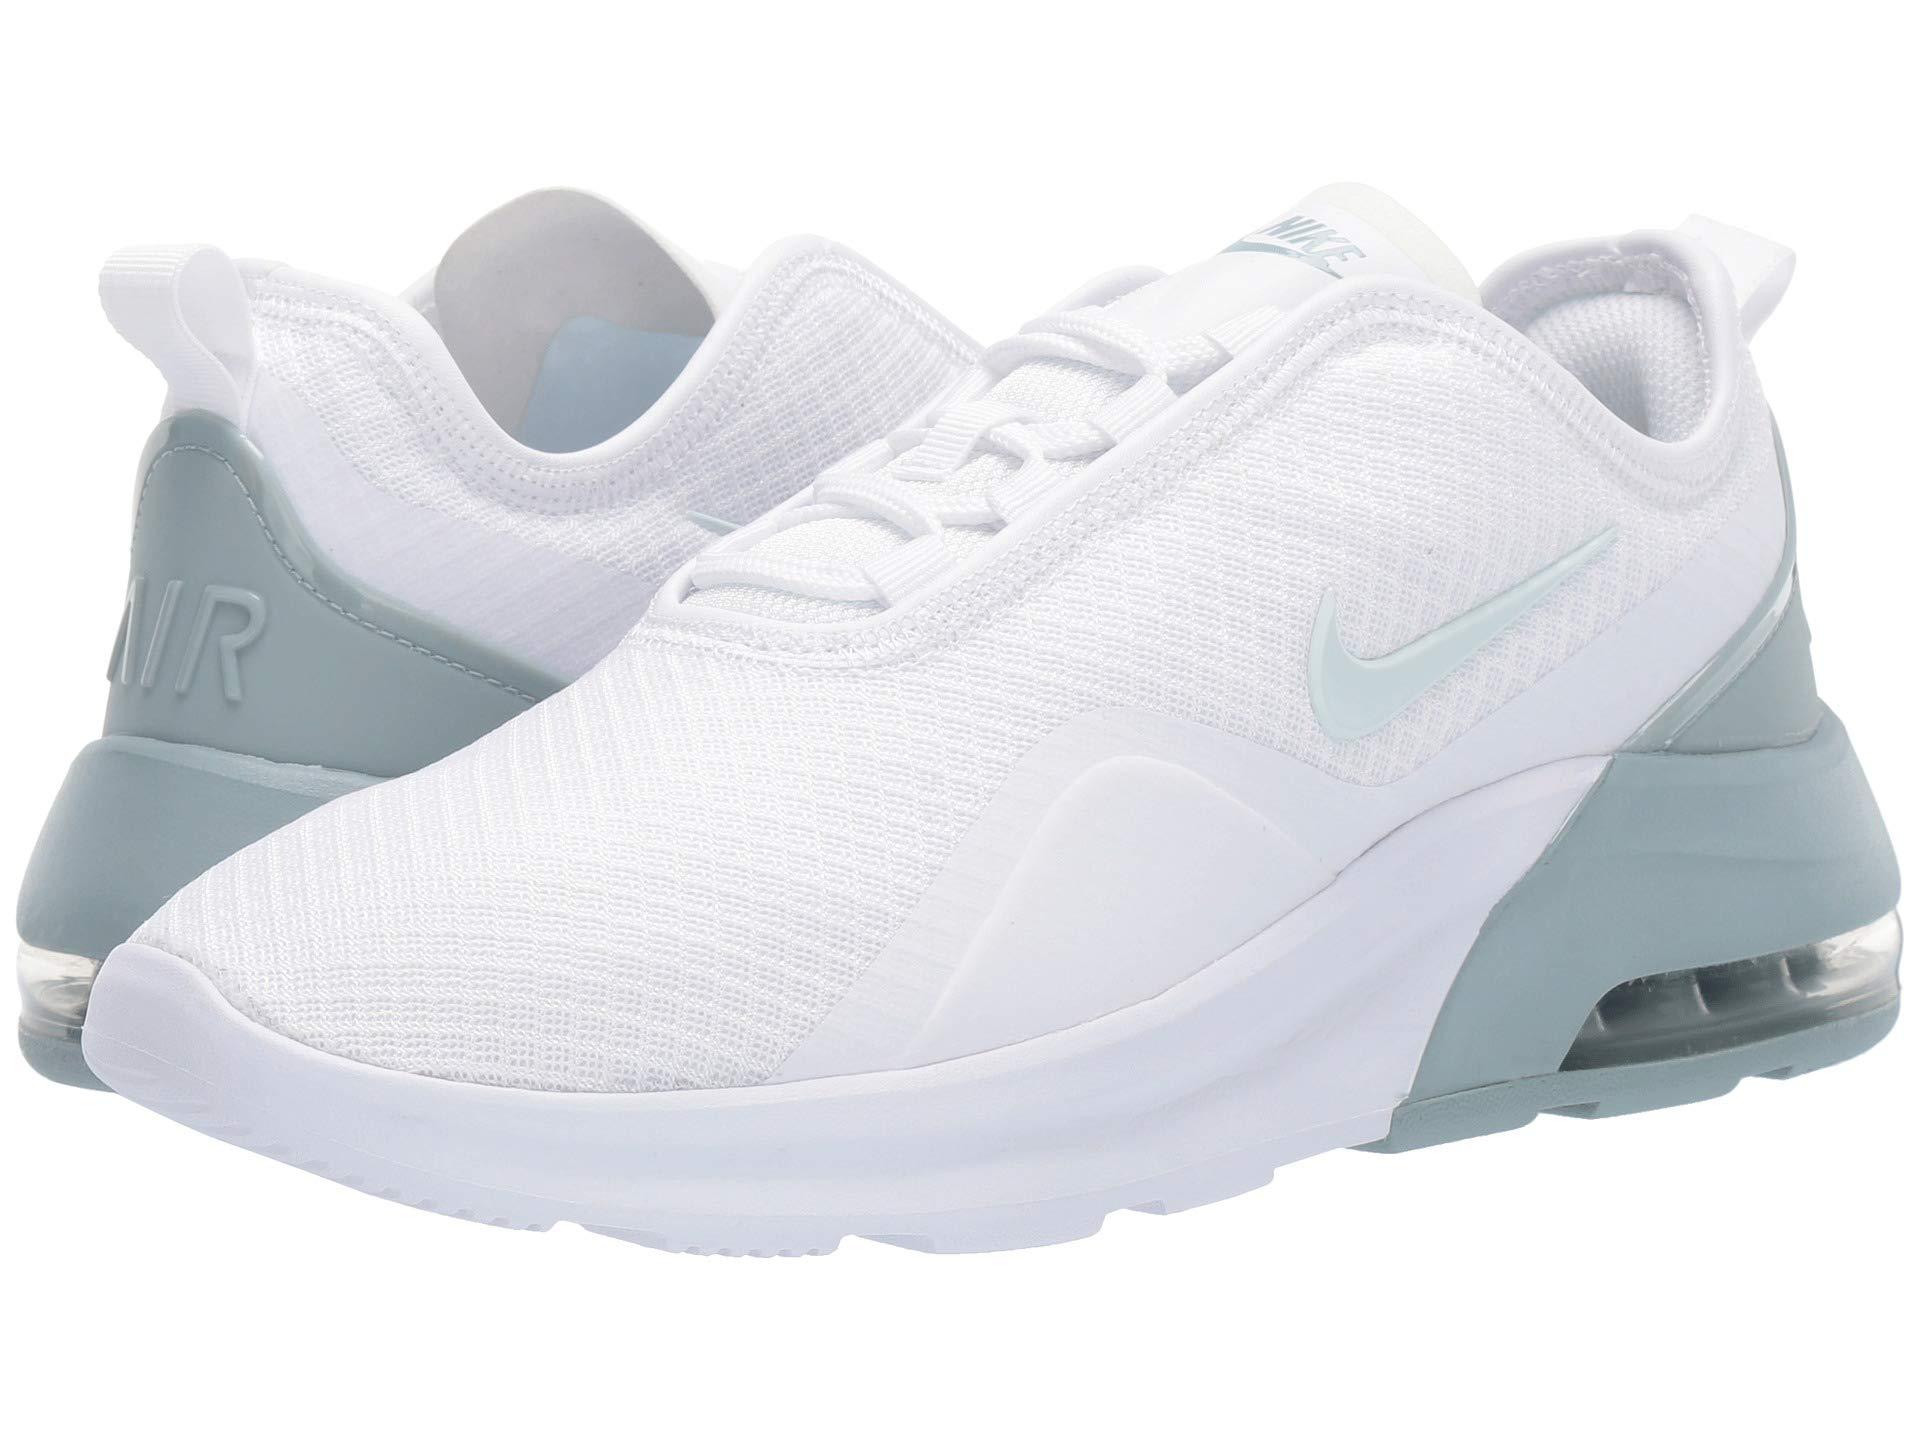 Nike Rubber Air Max Motion 2 Athletic Sneaker in White - Lyst